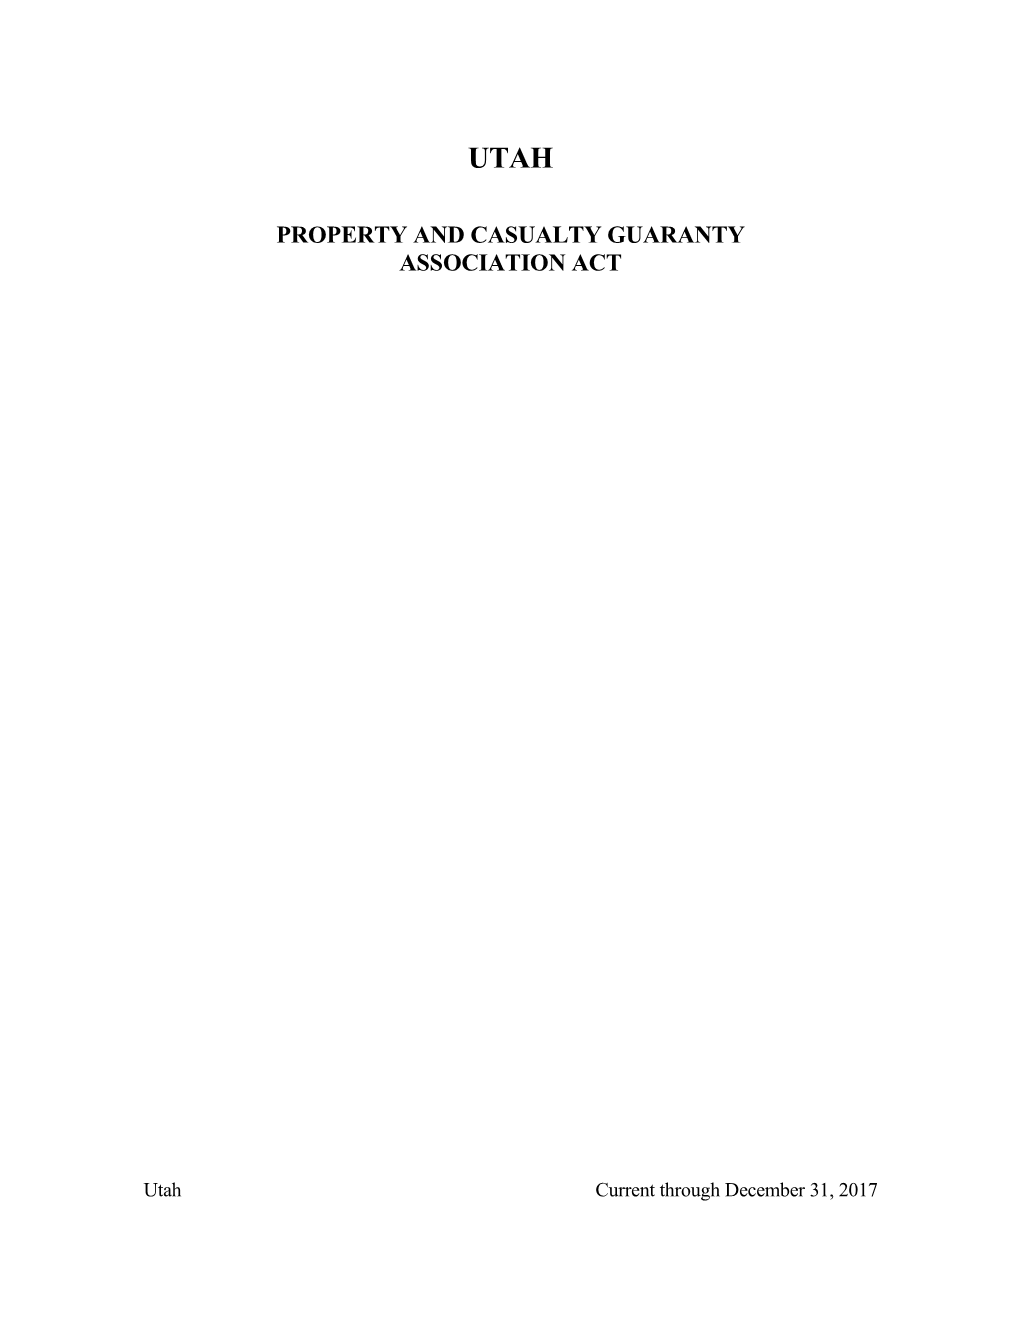 Property and Casualty Guaranty